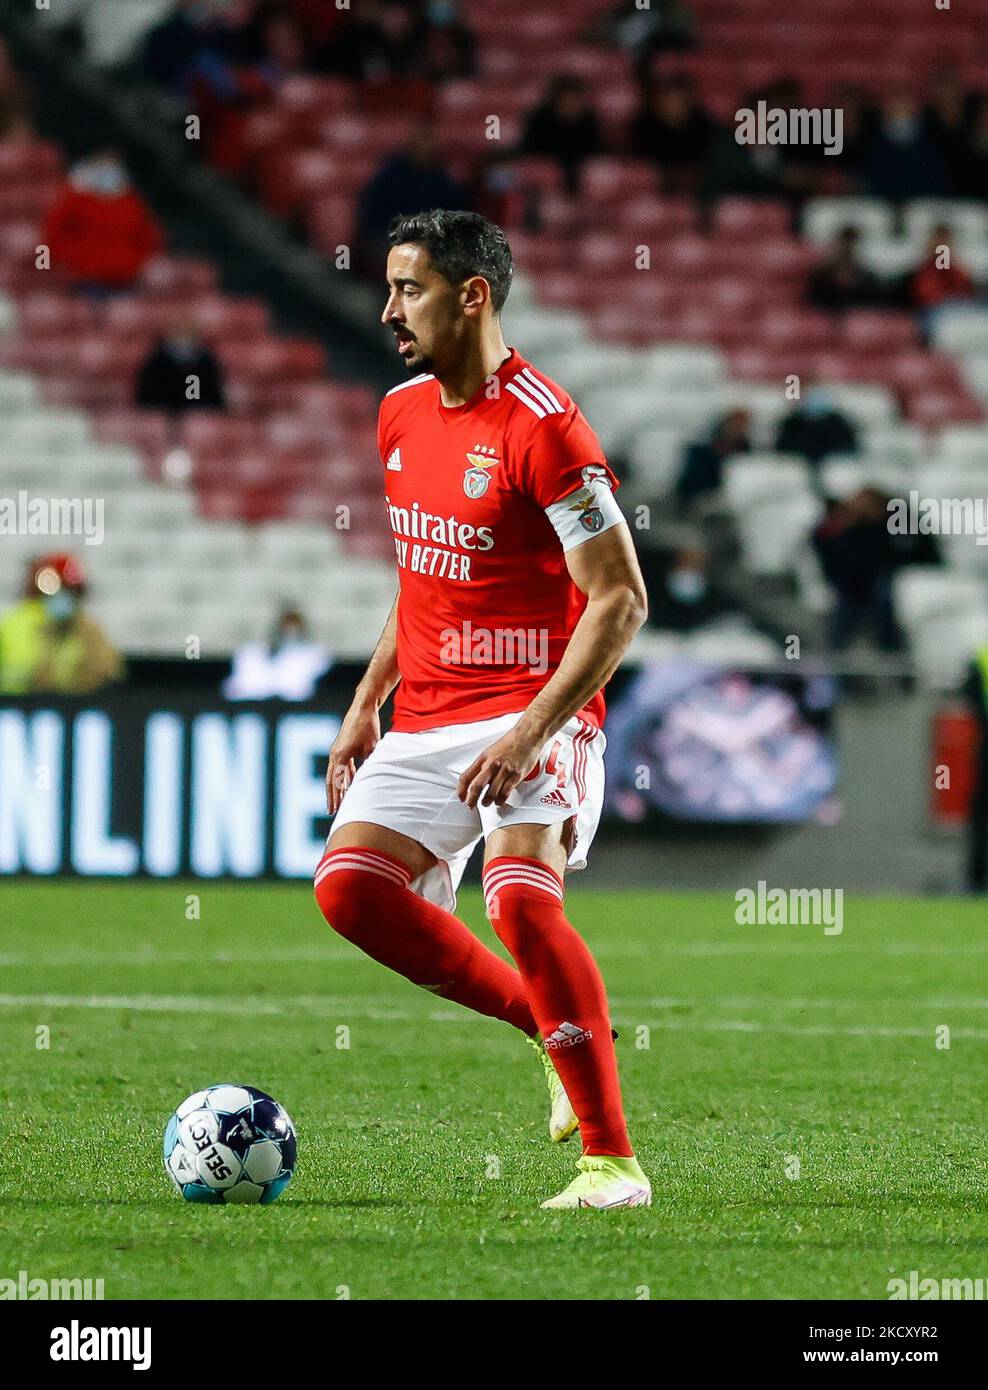 Andre Almeida of SL Benfica during the Allianz Cup match between SL Benfica and SC Covilha at Estadio da Luz on December 15, 2021 in Lisbon, Portugal. (Photo by Paulo Nascimento/NurPhoto) Stock Photo